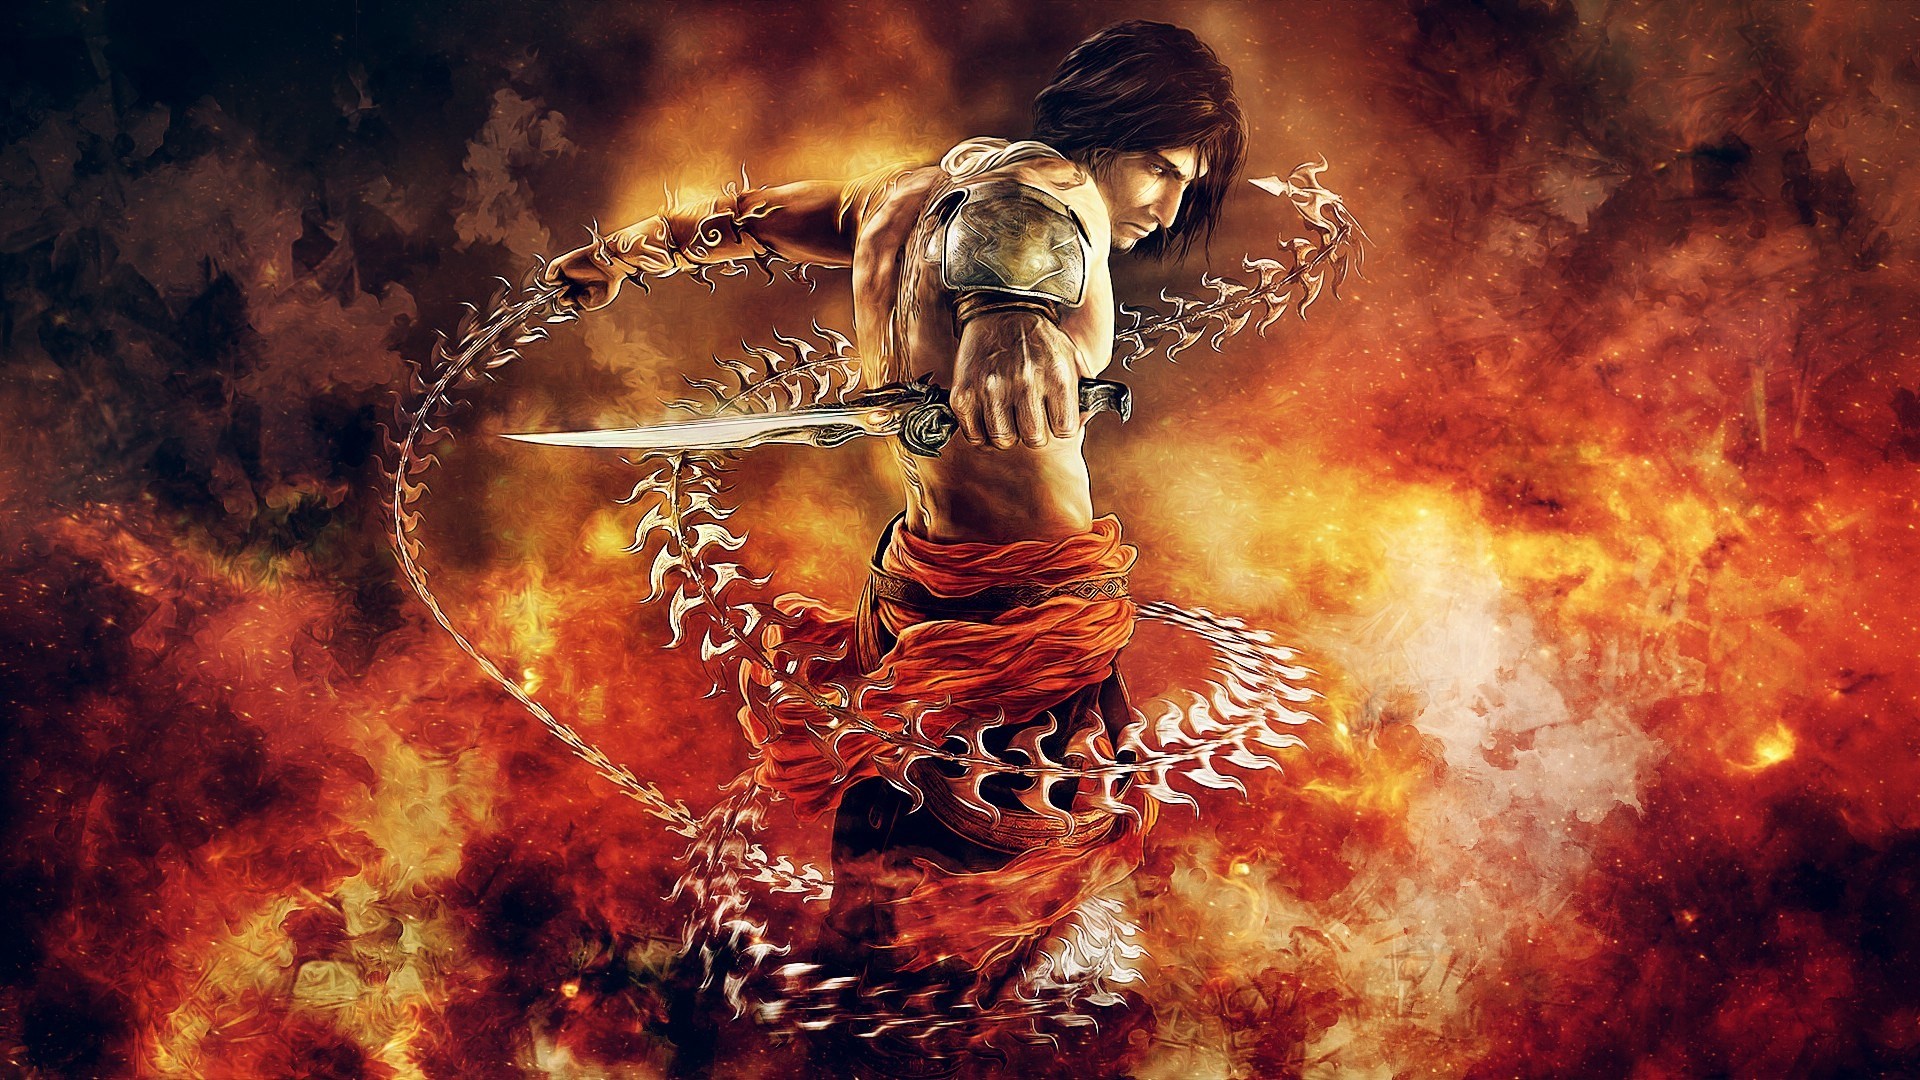 1920x1080 wallpapers free prince of persia the two thrones